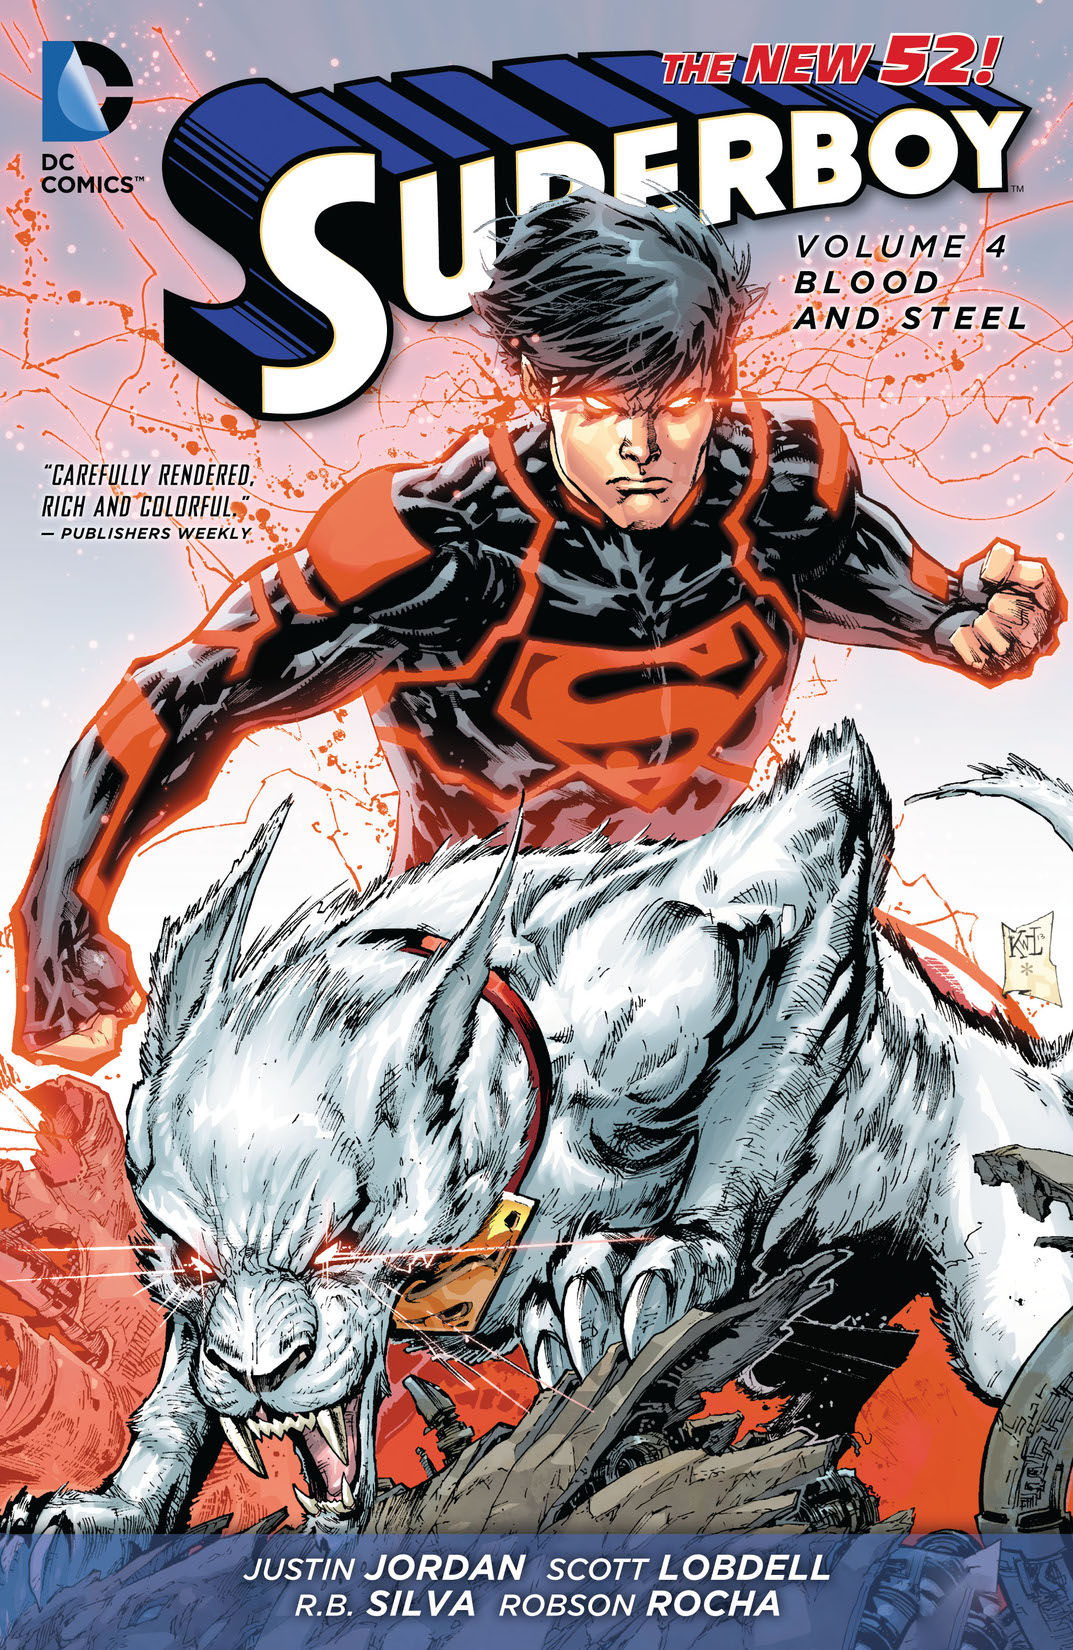 Superboy Vol. 4: Blood and Steel preview images